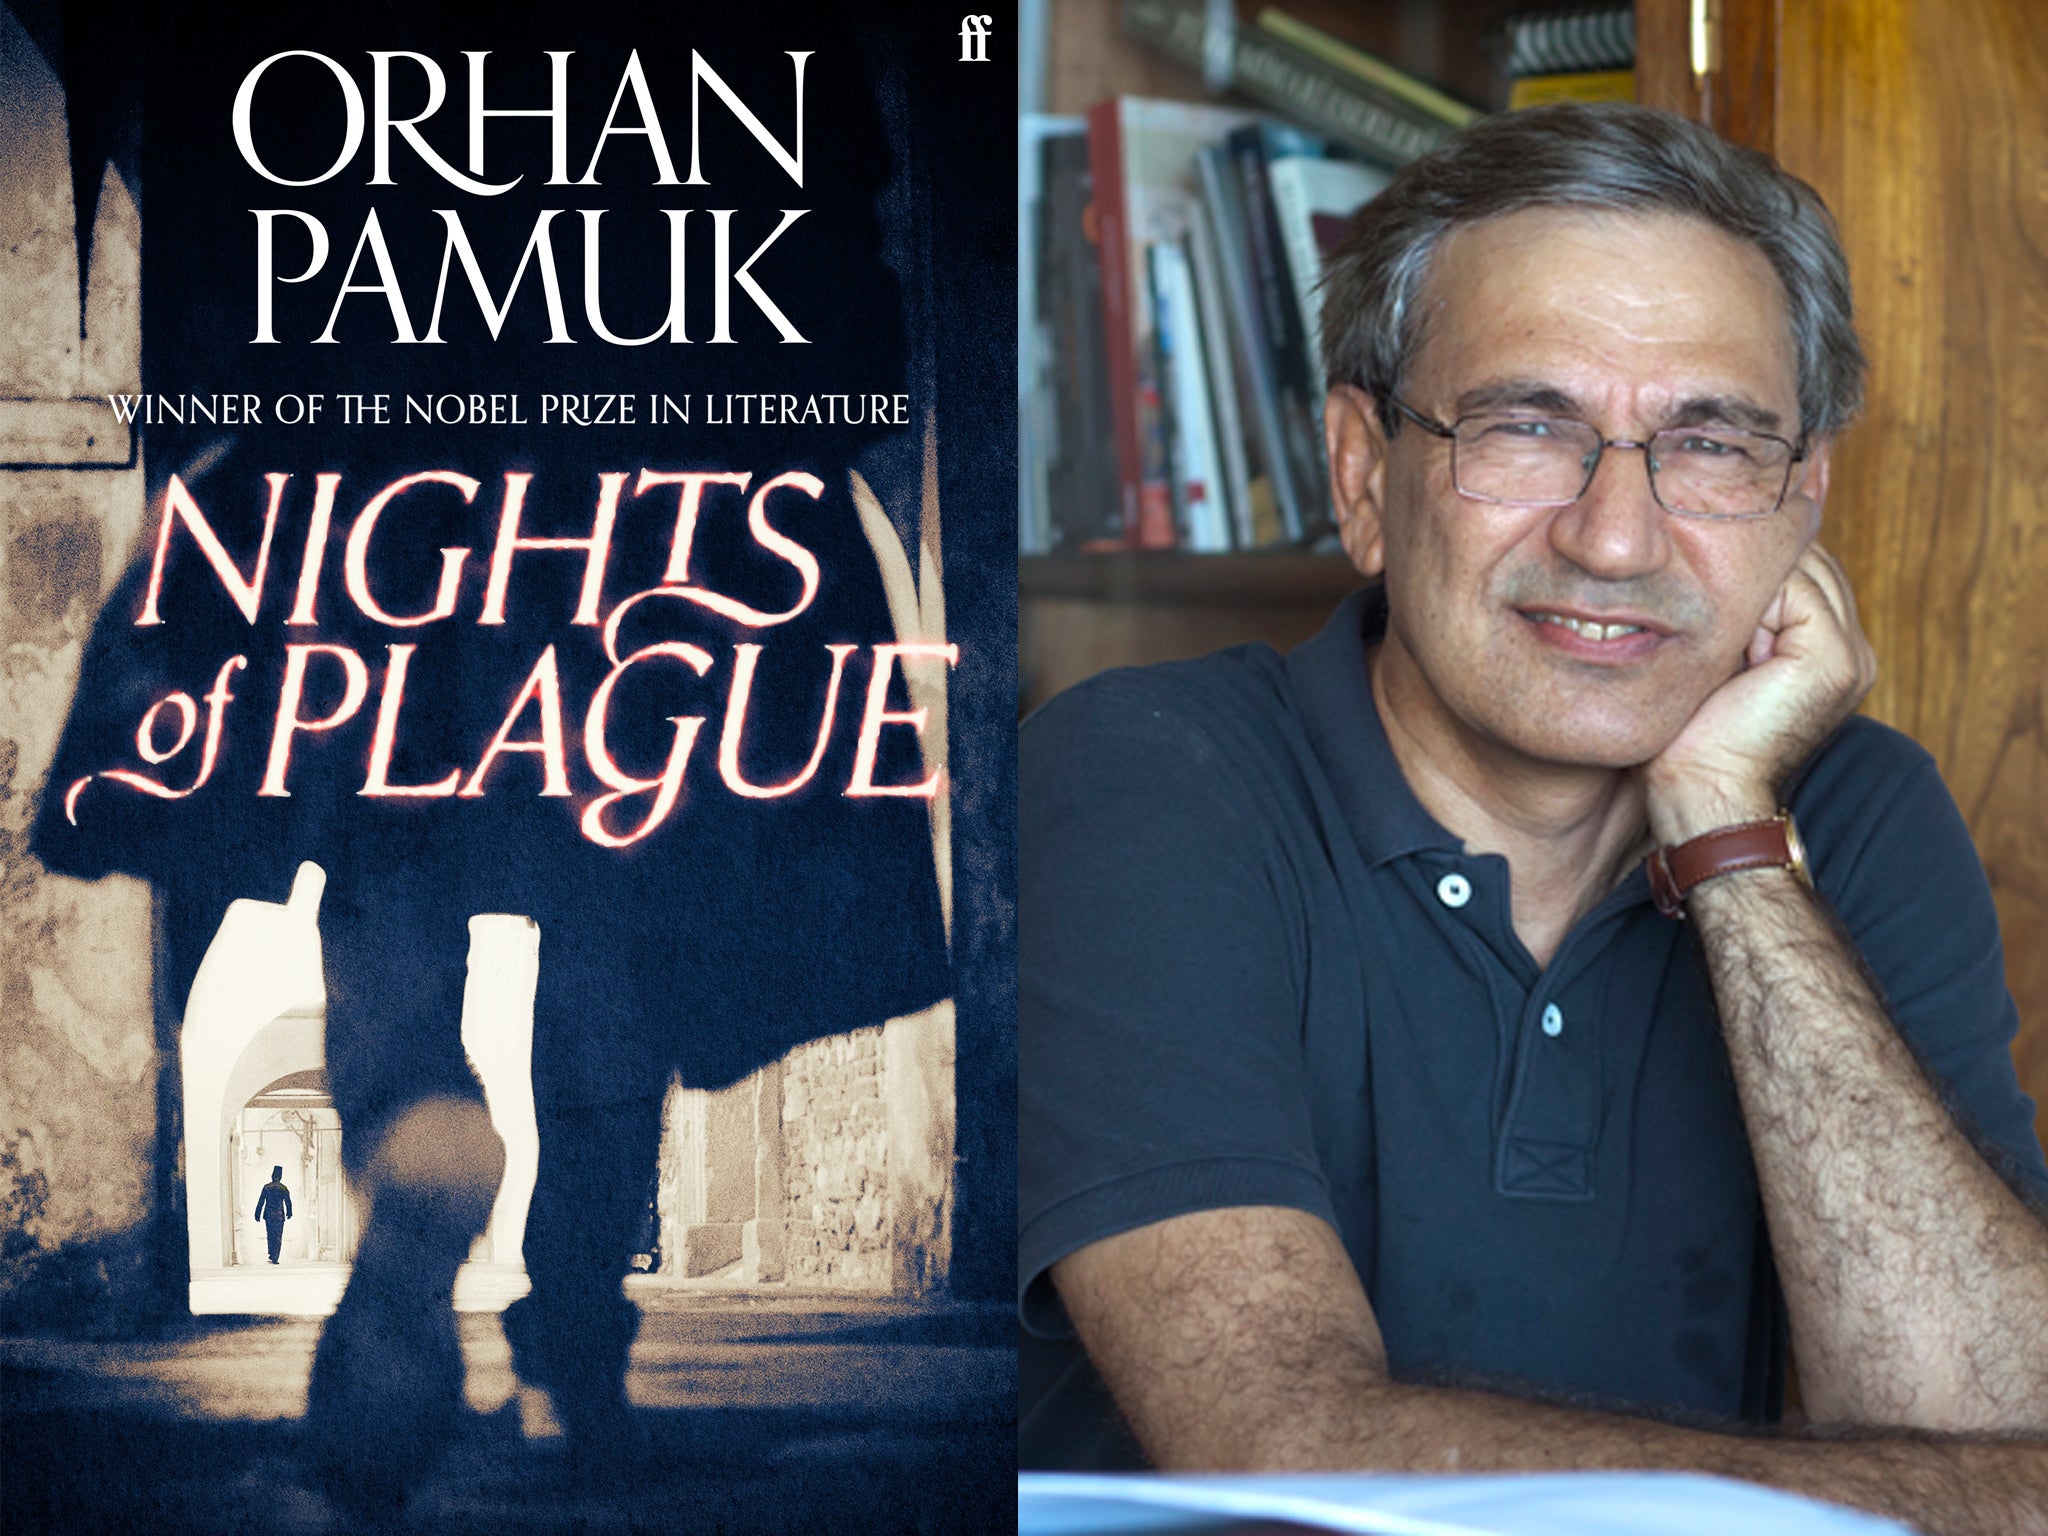 ‘Nights of Plague’, set on a fictional Ottoman island, will resonate with those of us who are still reeling from the Covid pandemic